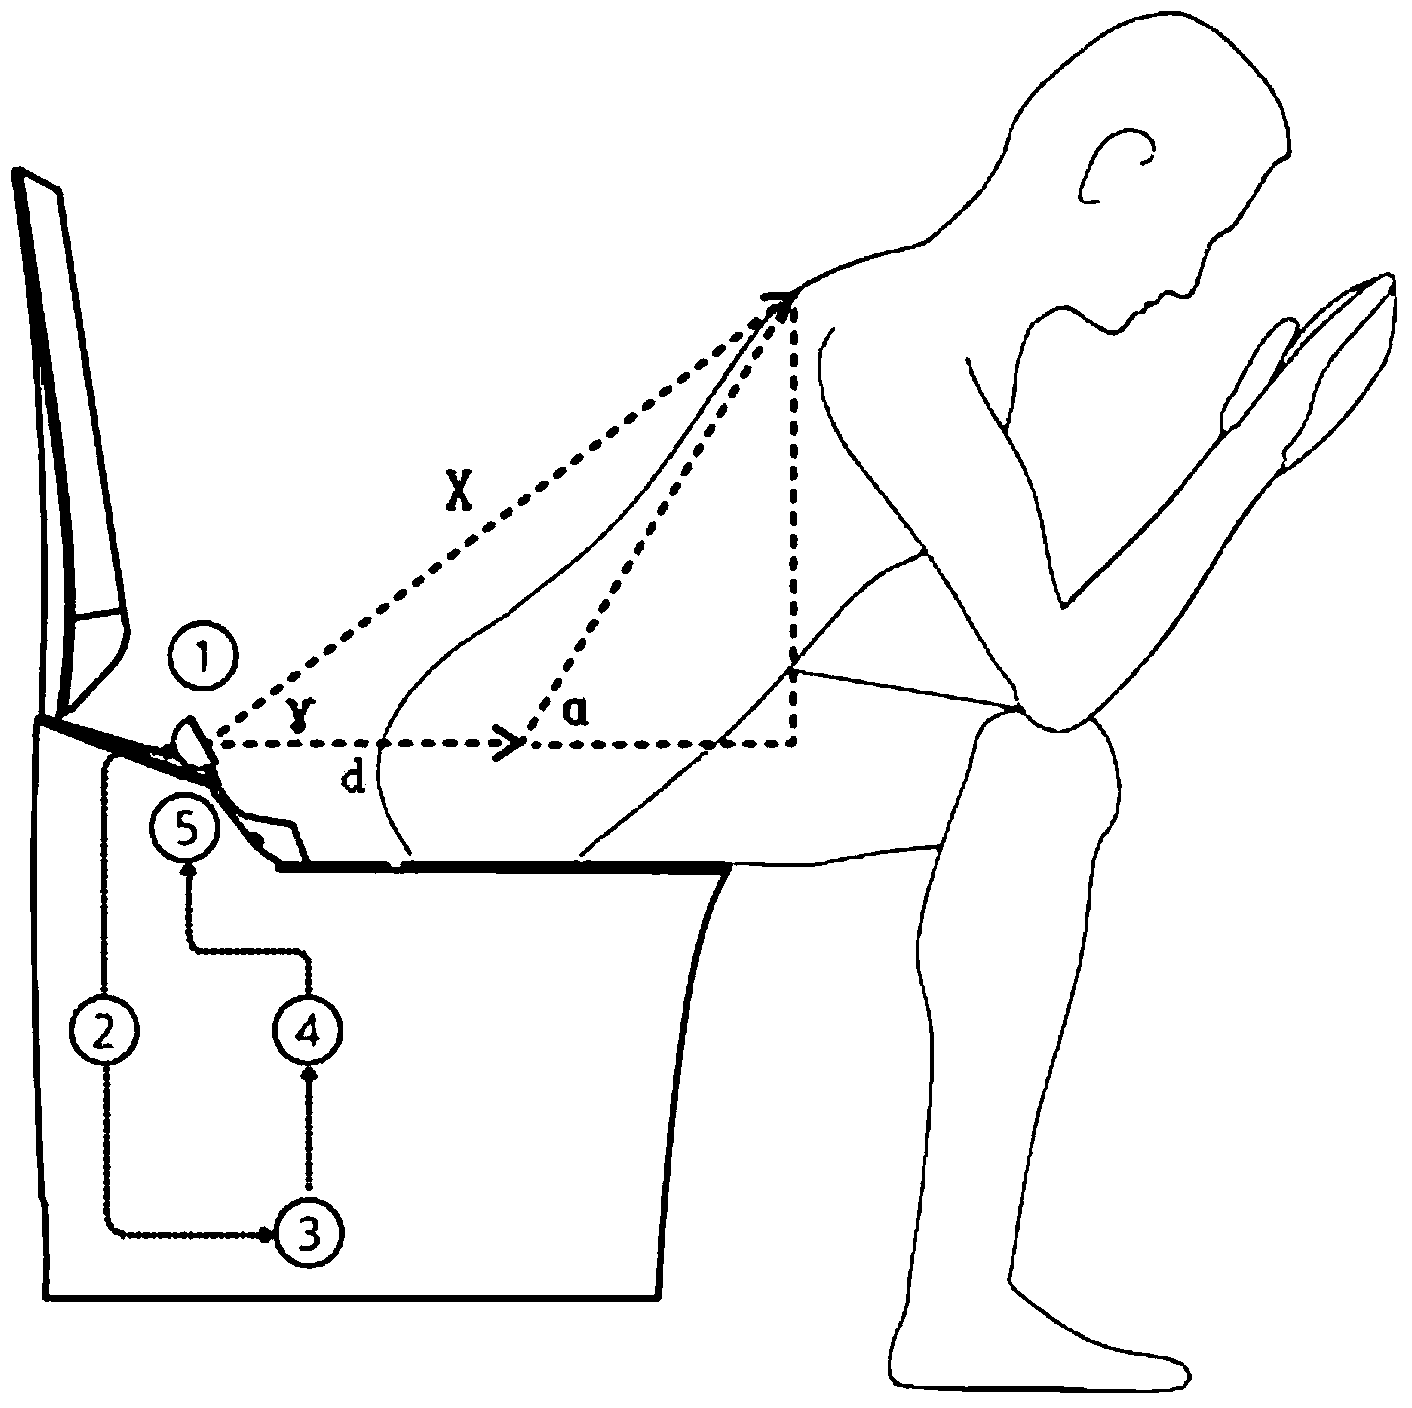 Sitting posture prompting device for toilet